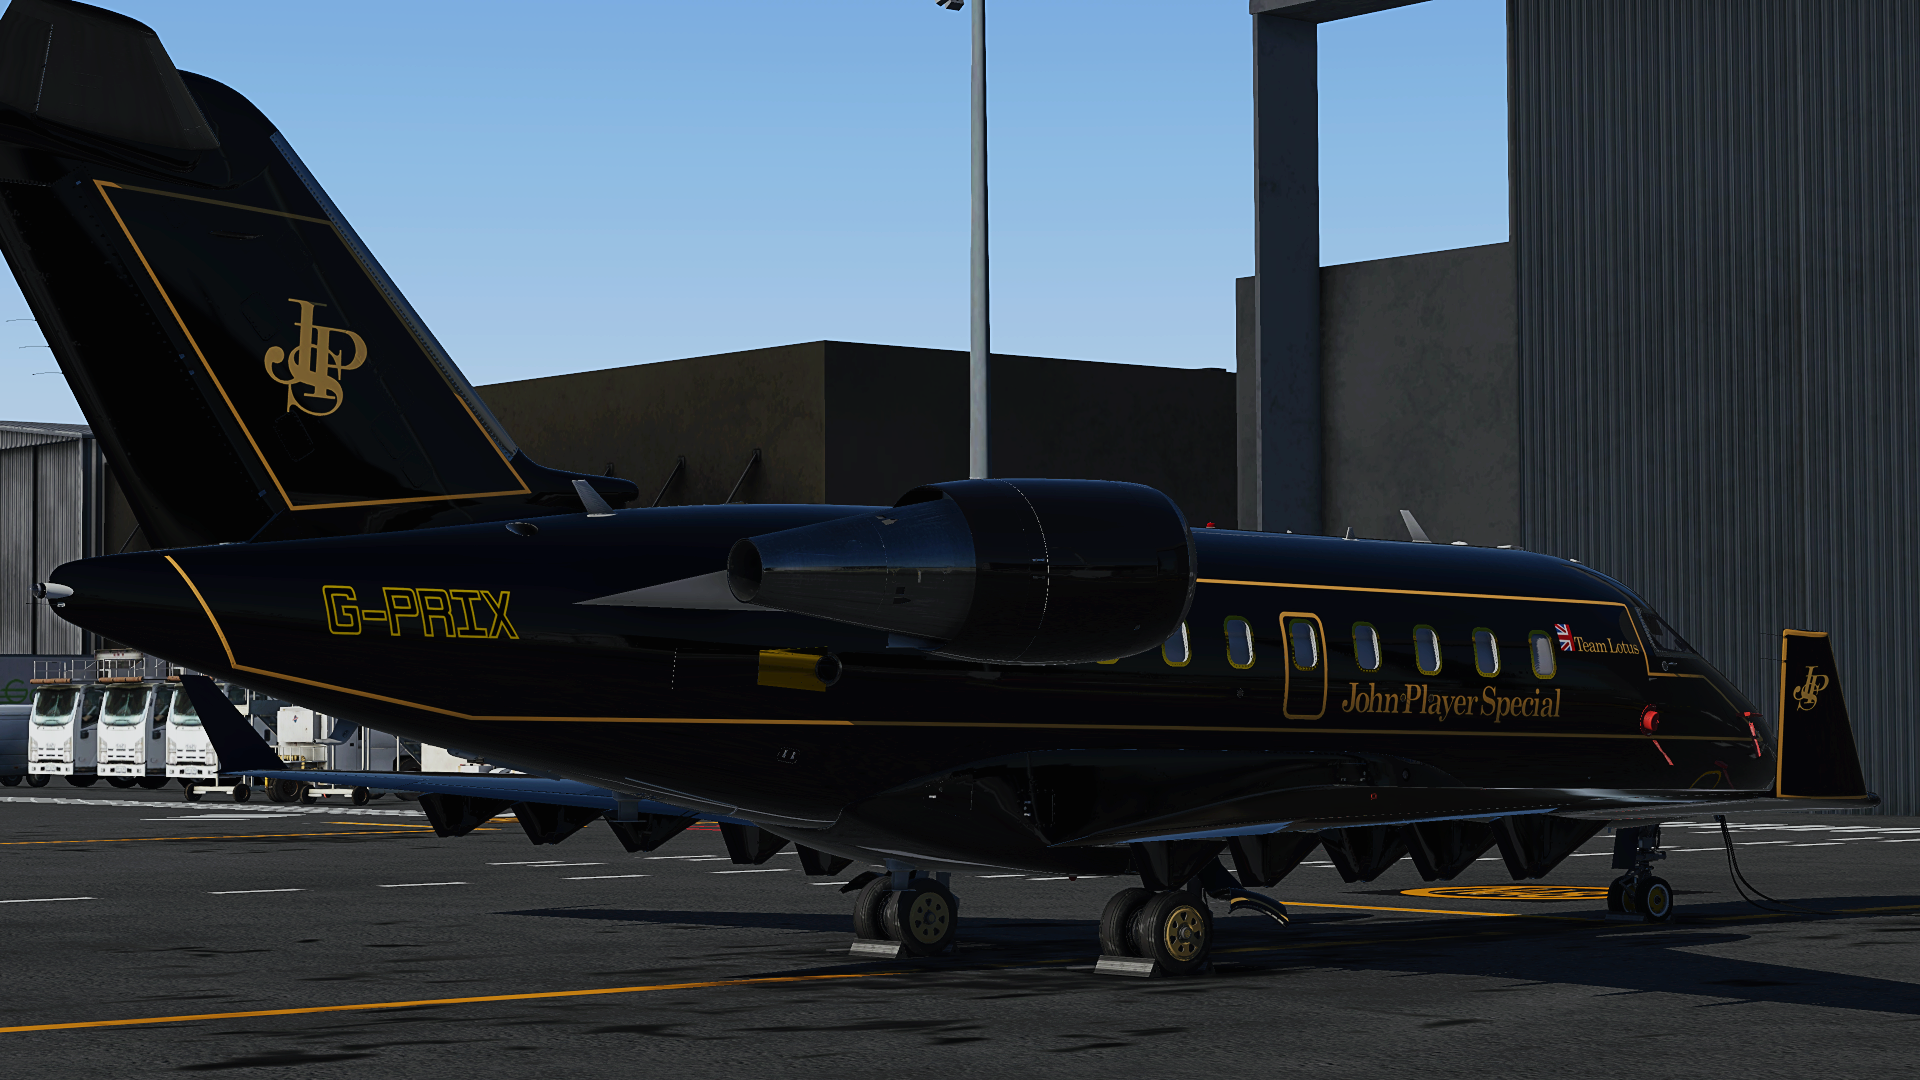 More information about "Hot start Challenger 650 - Lotus Livery (John Player)"